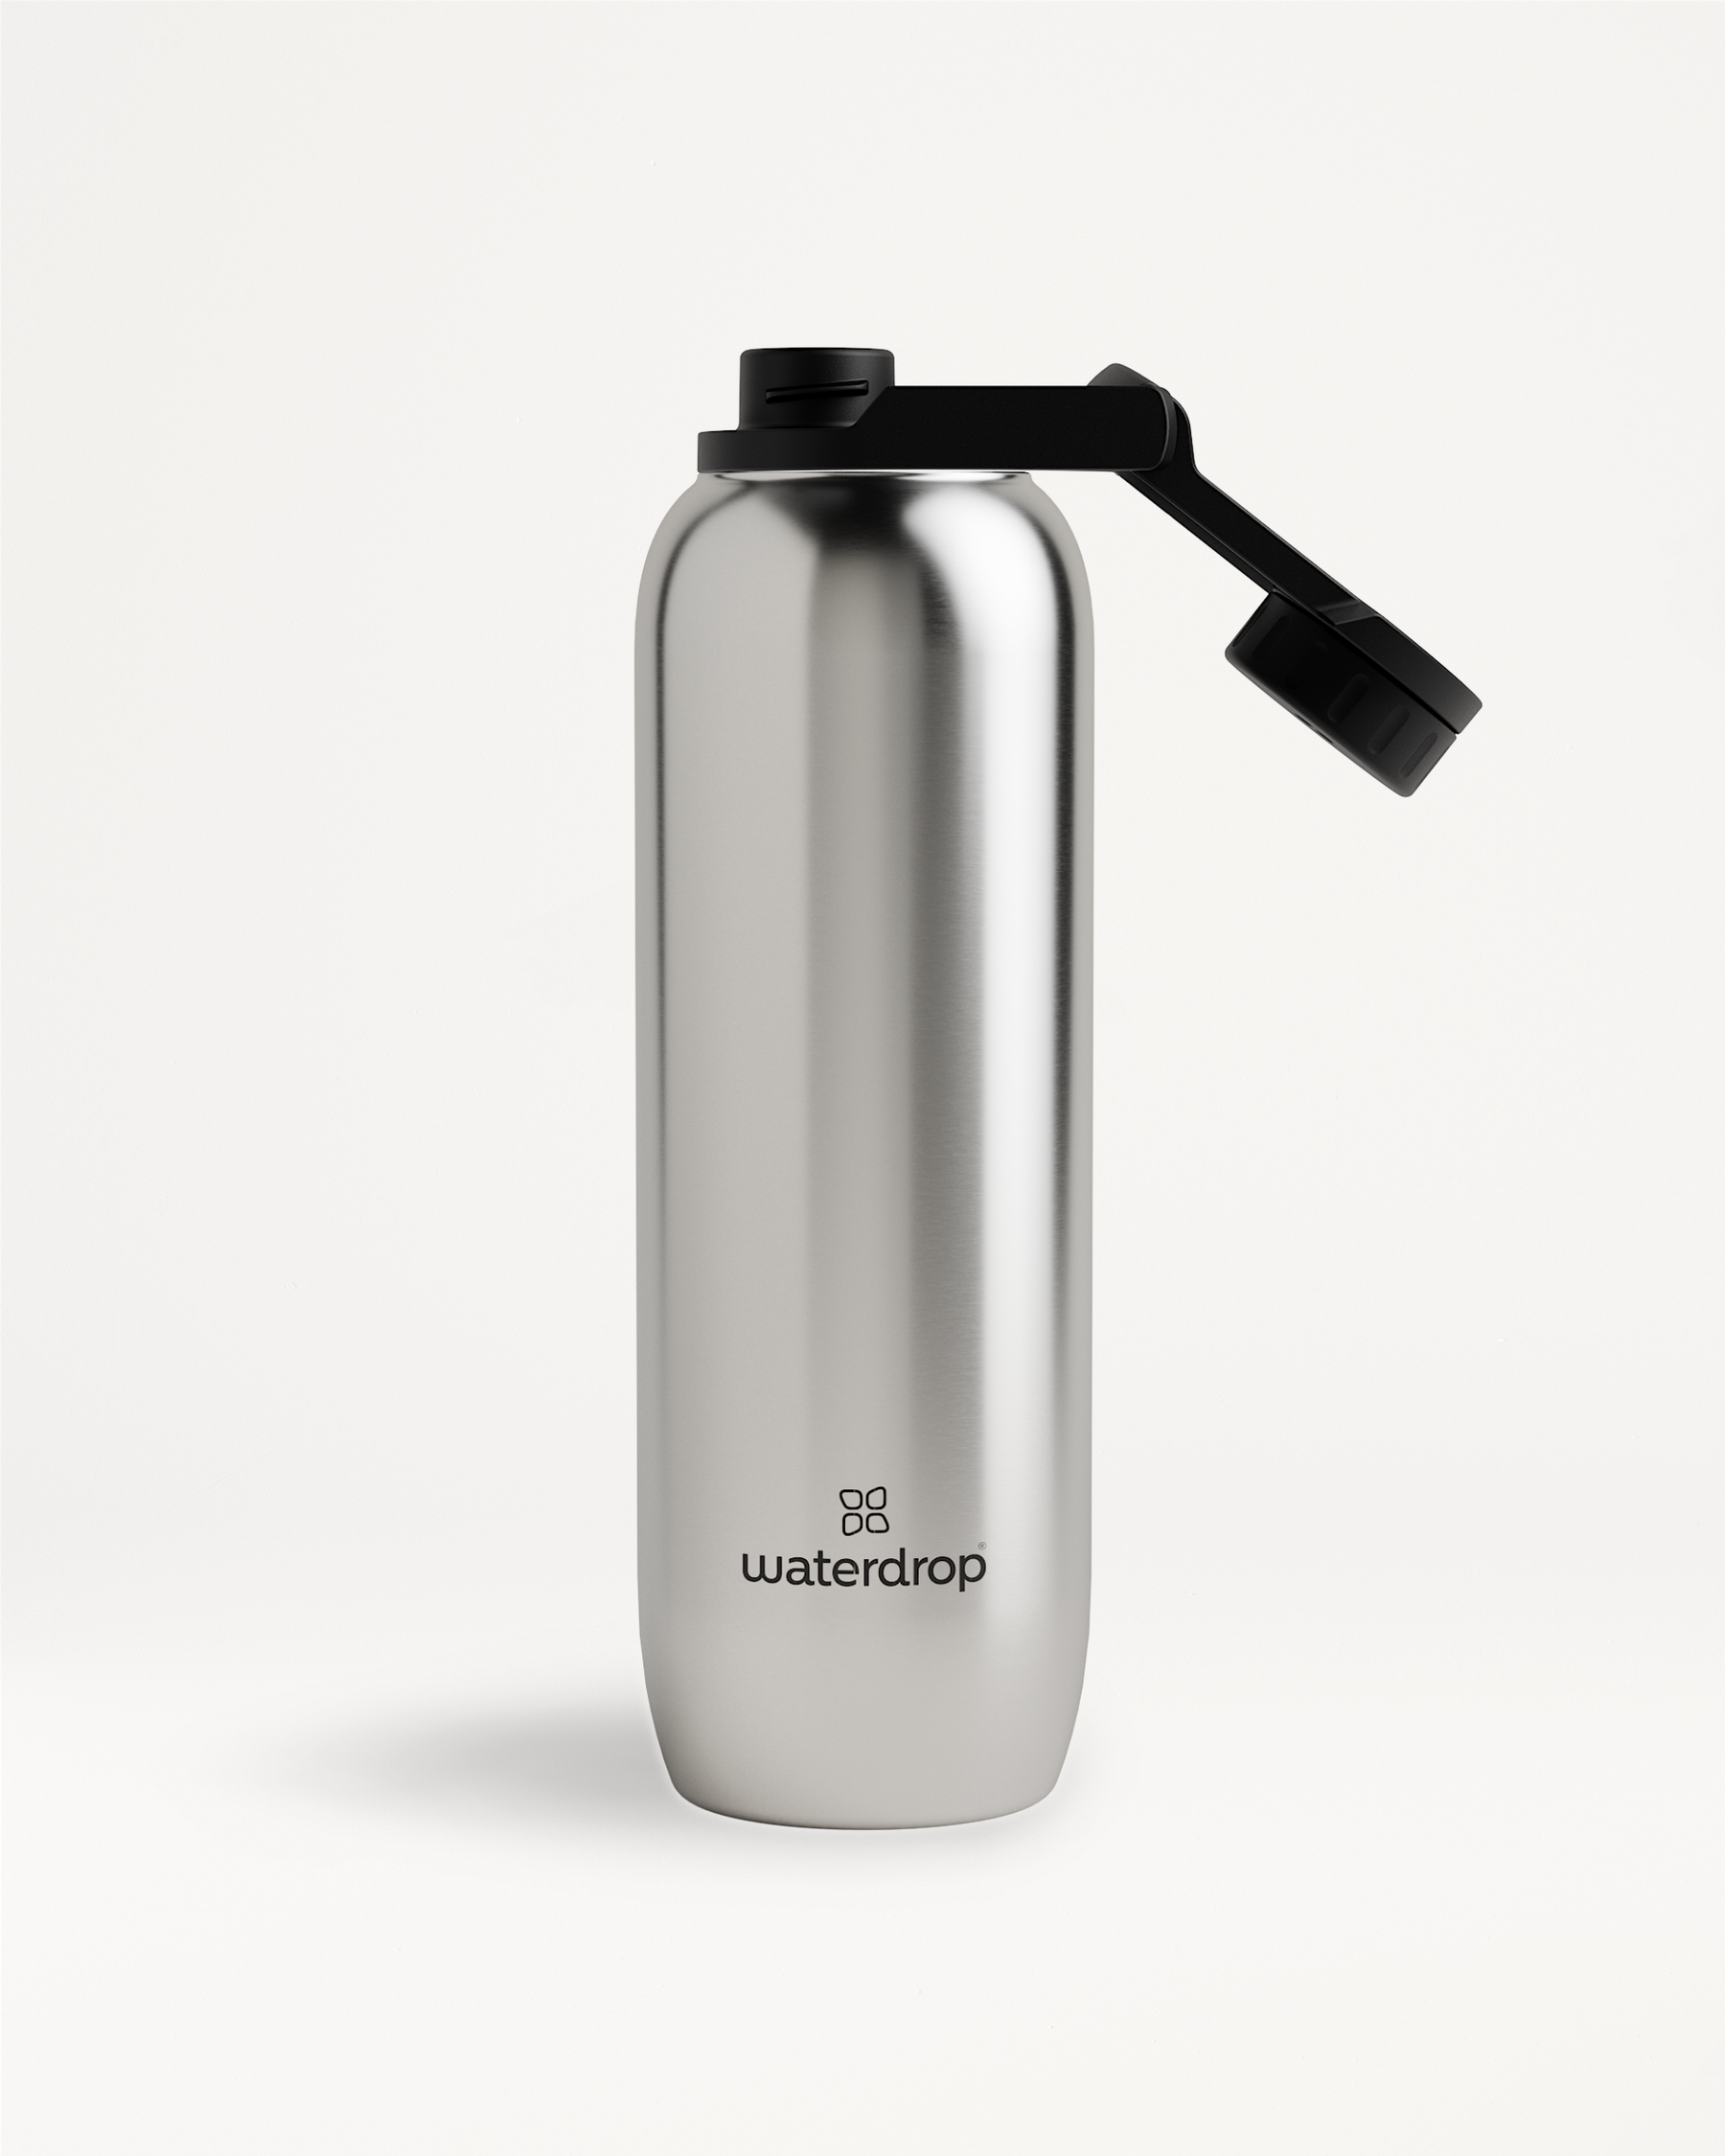 64oz Large Capacity Vacuum Water Bottle with Swing Lid Thermos